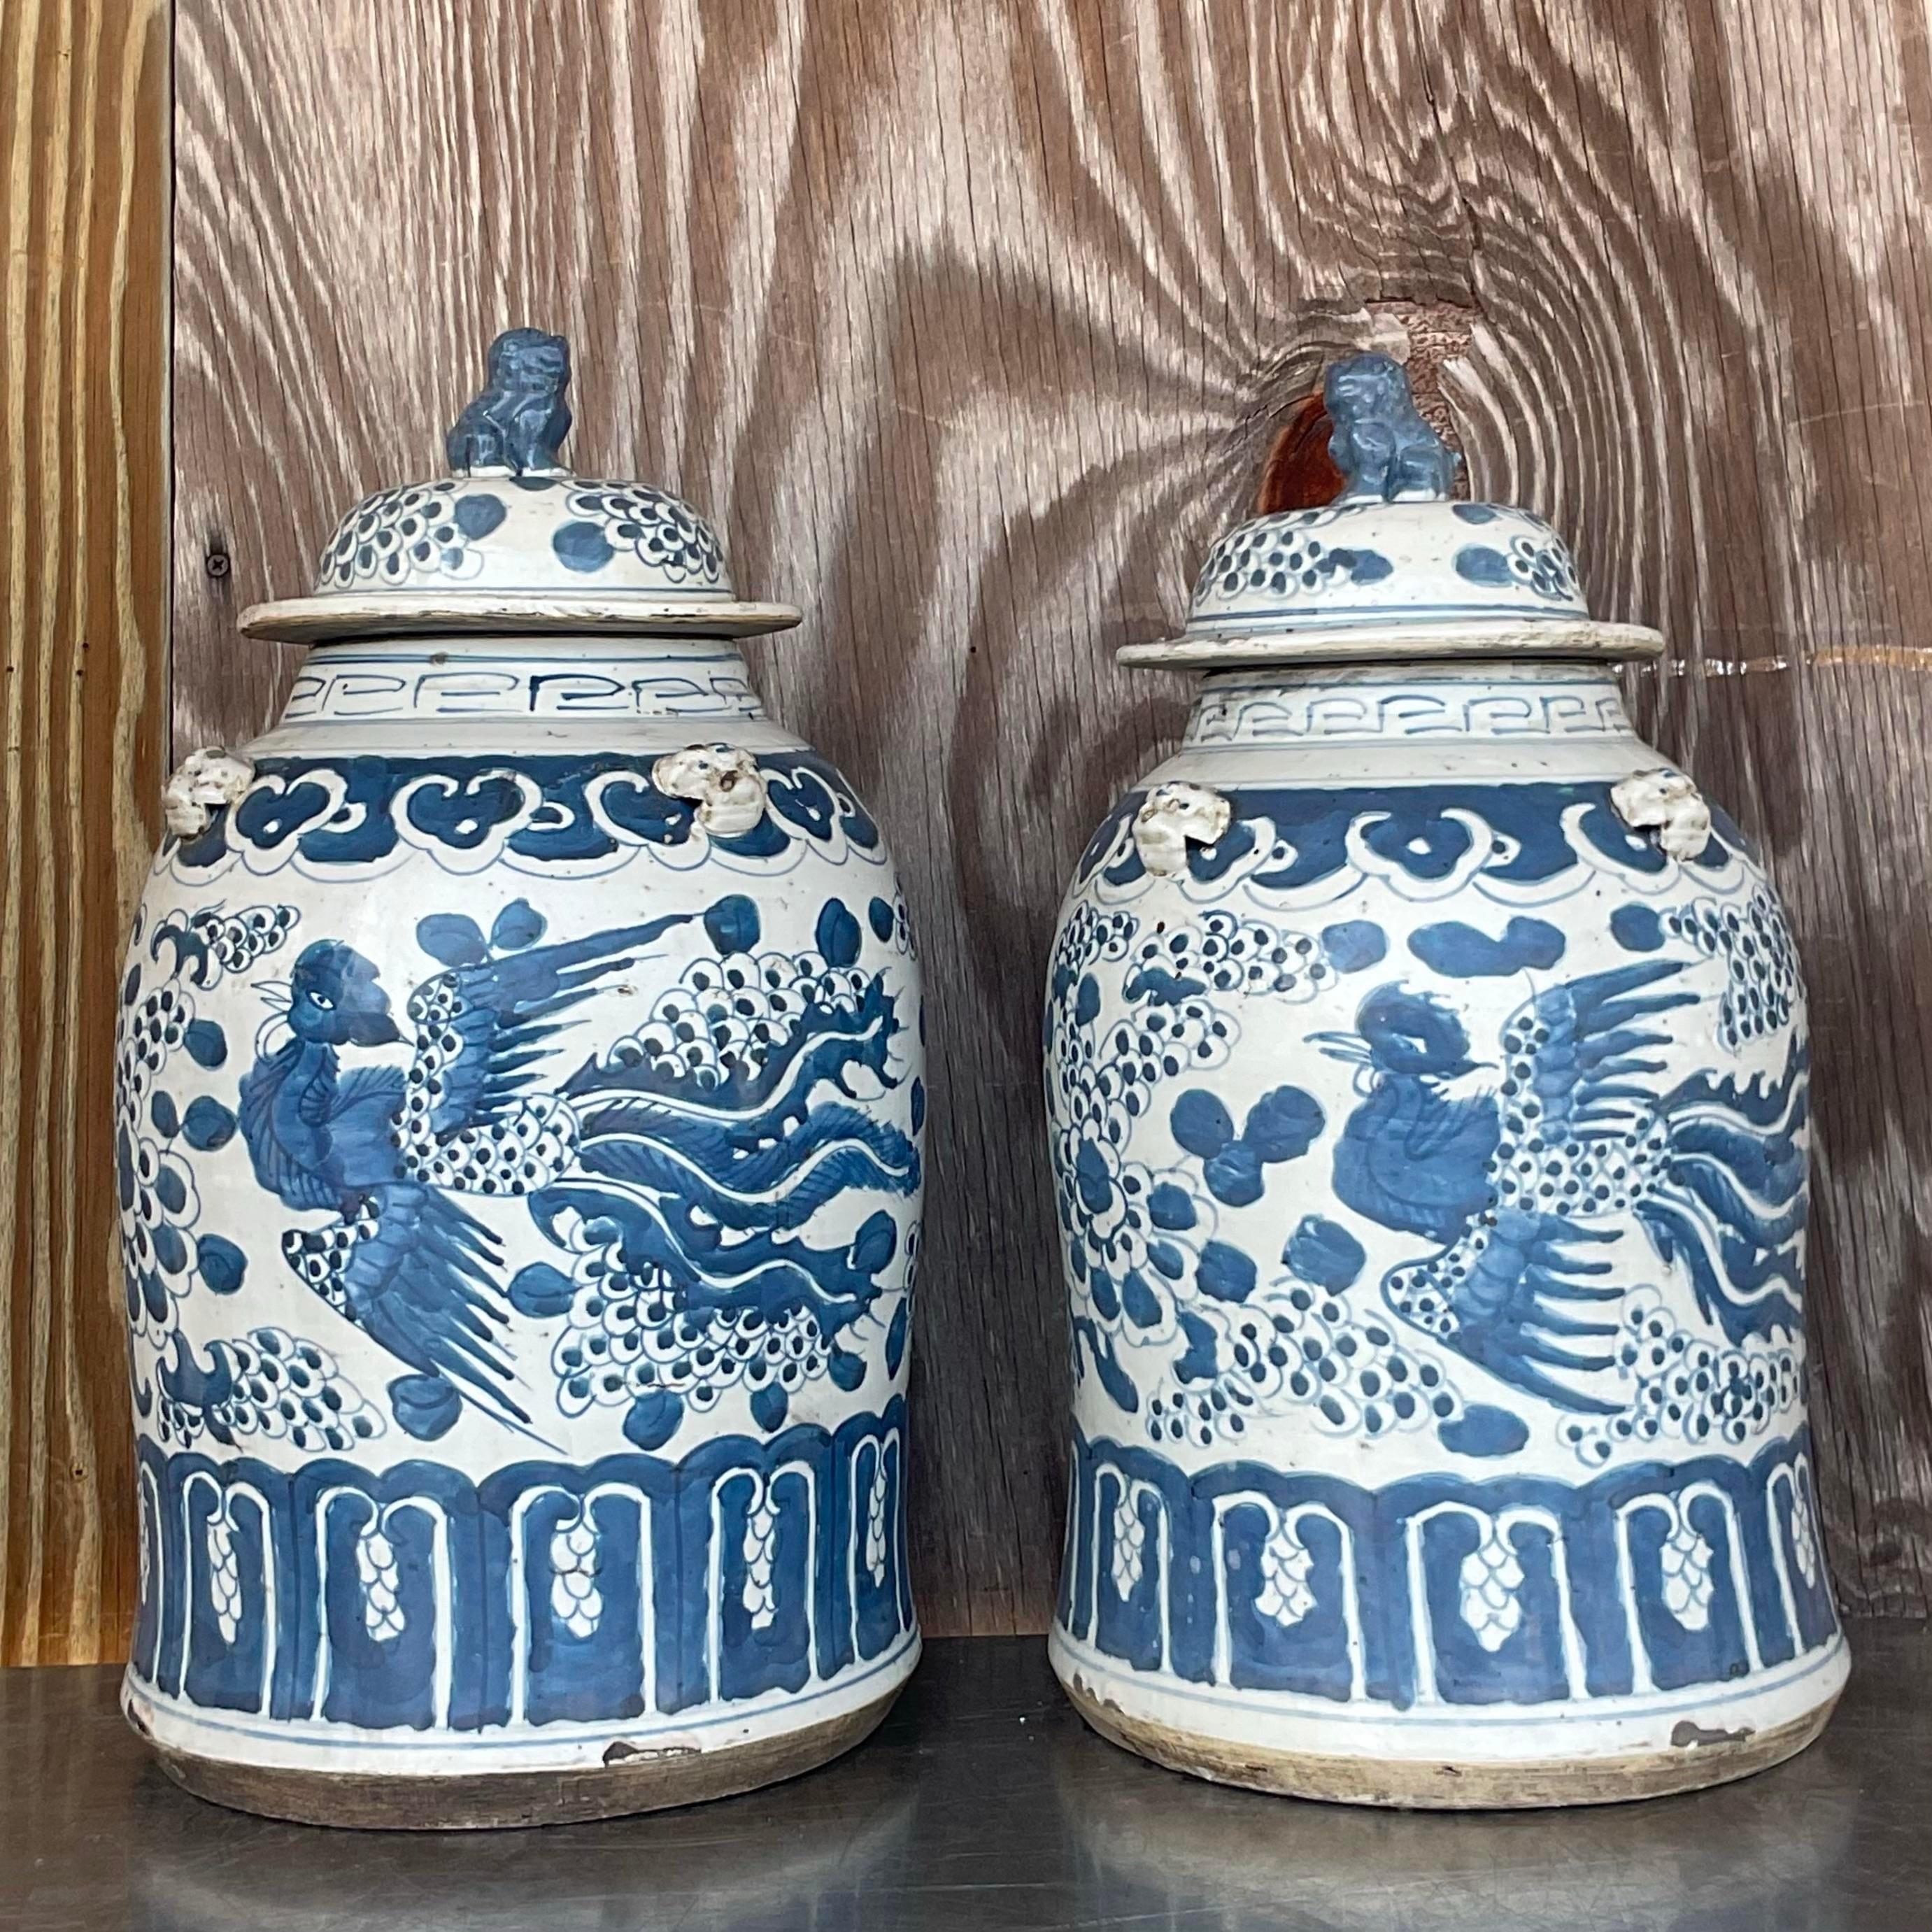 A stunning pair of vintage urns. A chic Asian Pastoral design in the iconic Blue and White palate. A matte glaze over a heavy pottery vessel. Totally stunning. Acquired at a Palm Beach estate.